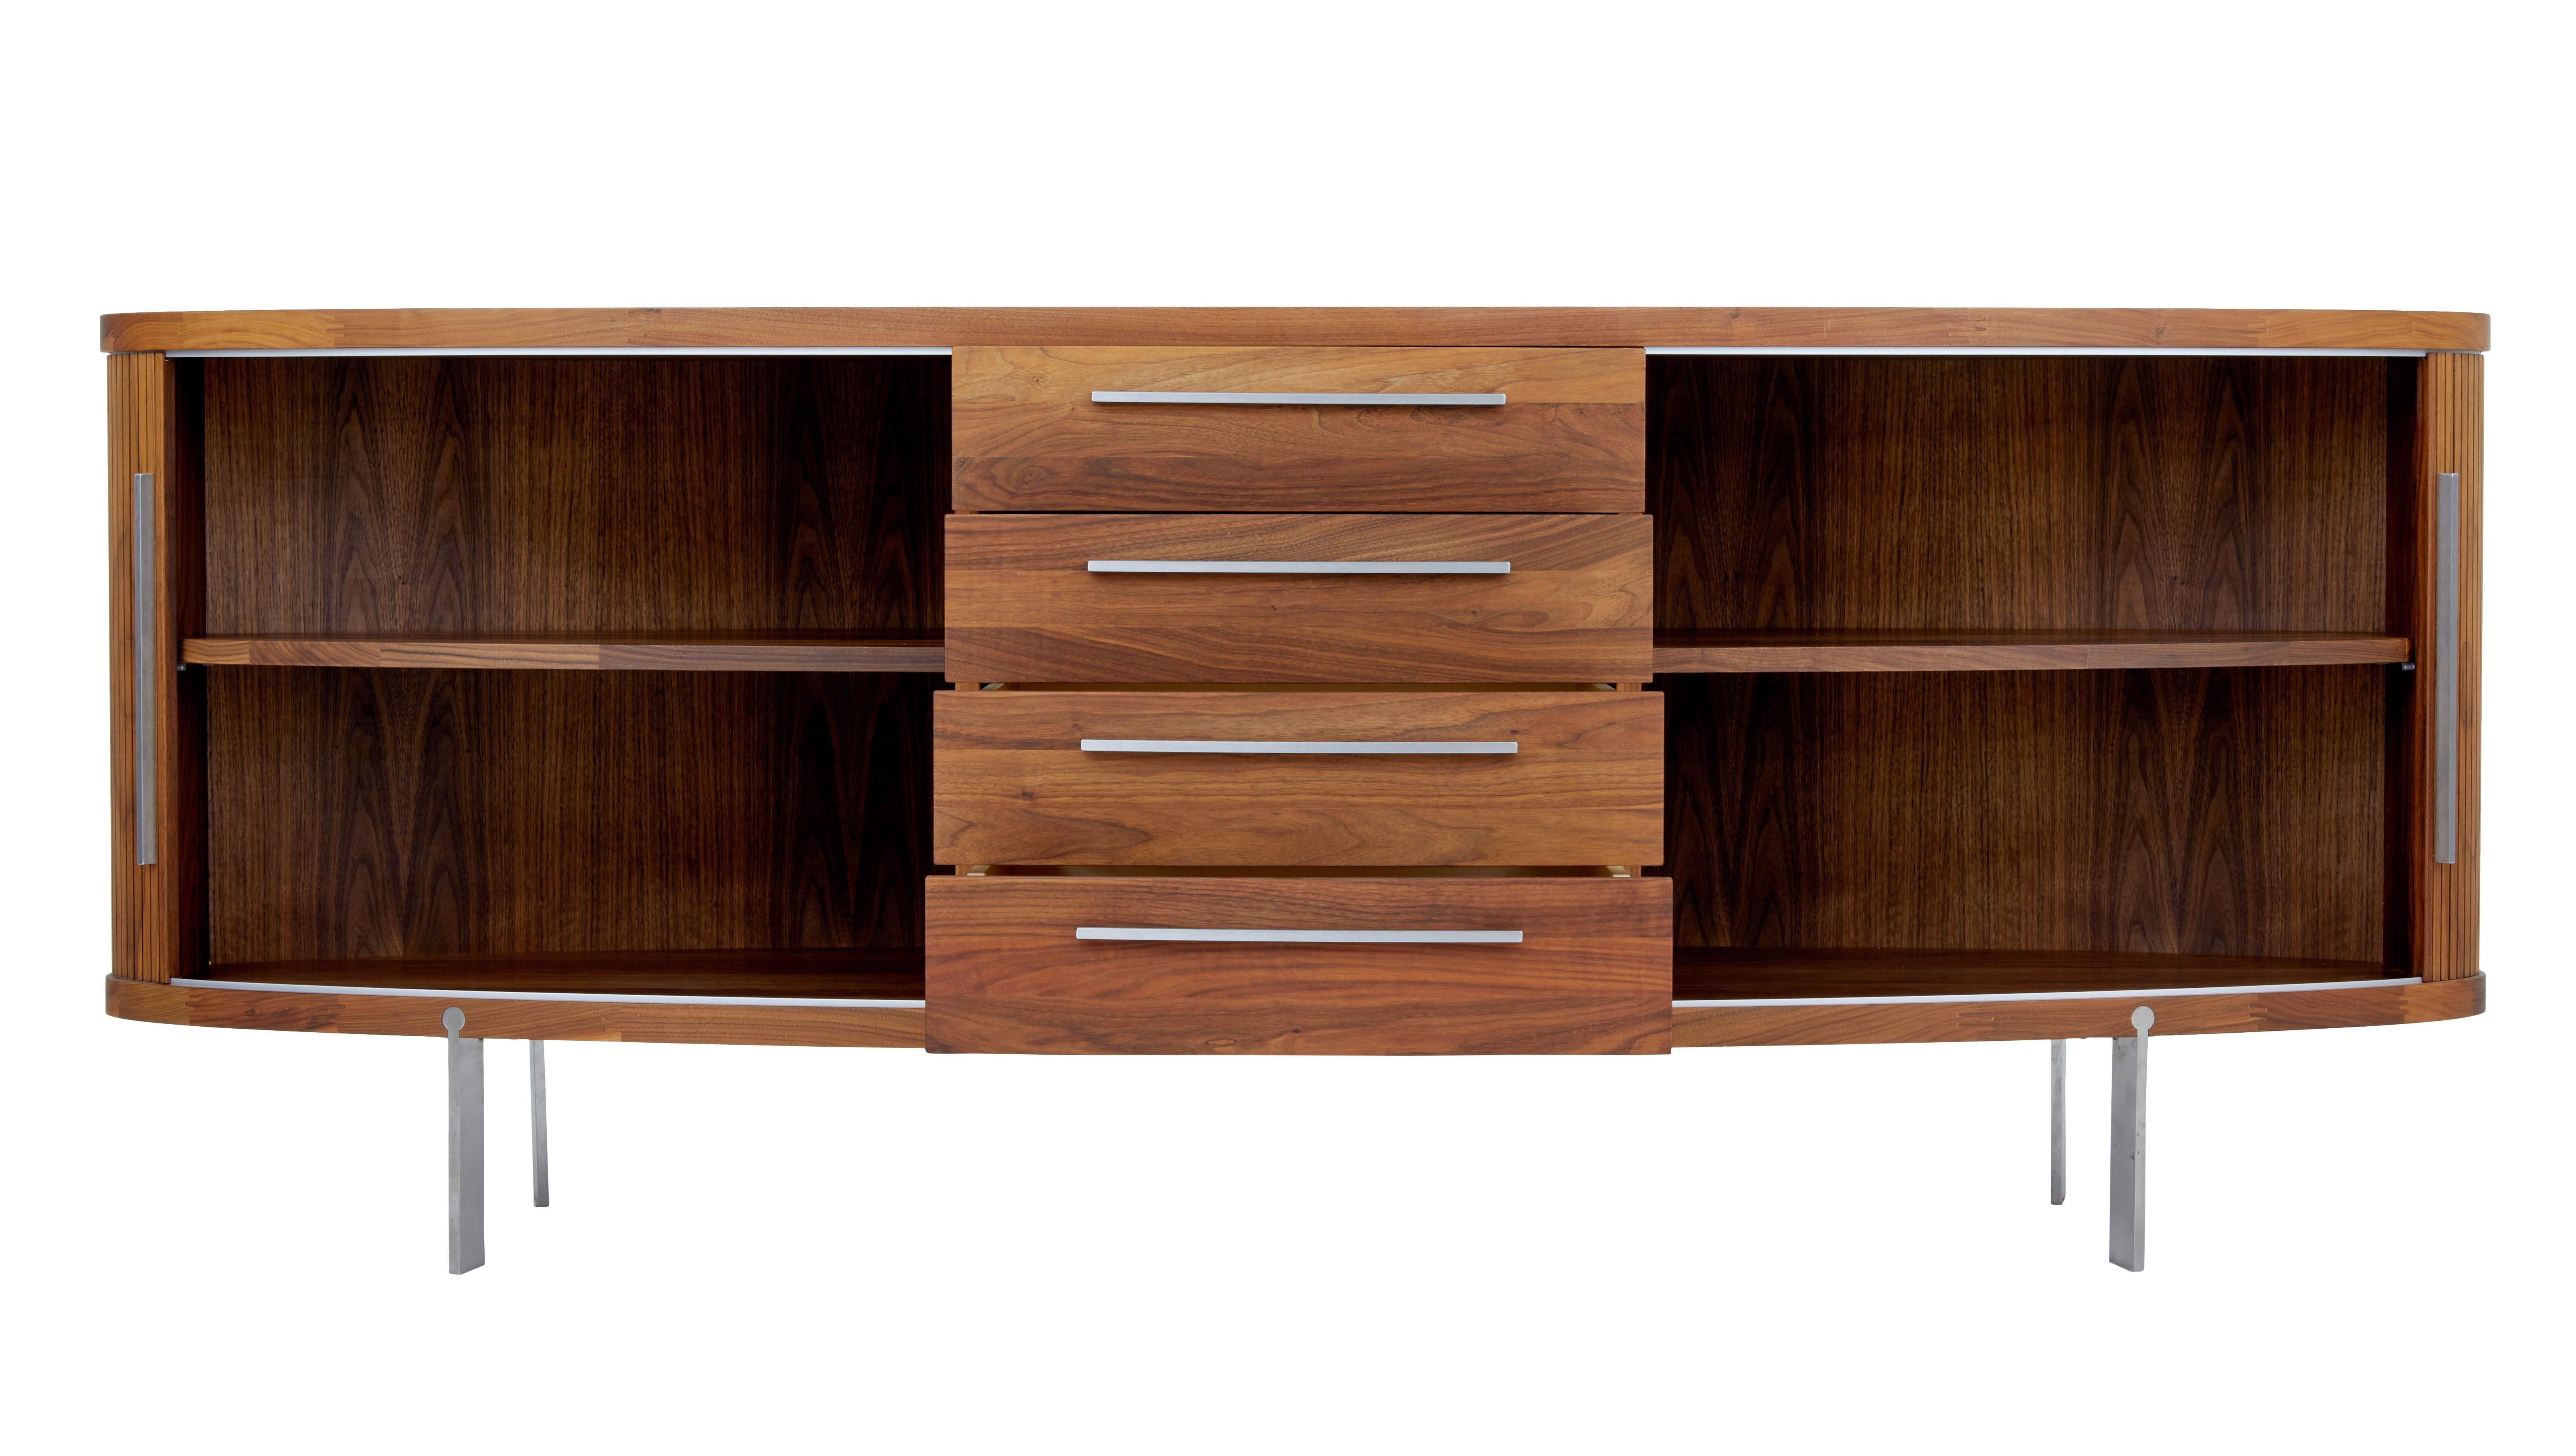 Fine quality piece of 21st century design from the Naver collection circa 2010.

Designed by Soren Nissen and Ebbe Gehl this oval shaped sideboard is a real modern classic. A central bank of 4 drawers with brushed steel handles is flanked either